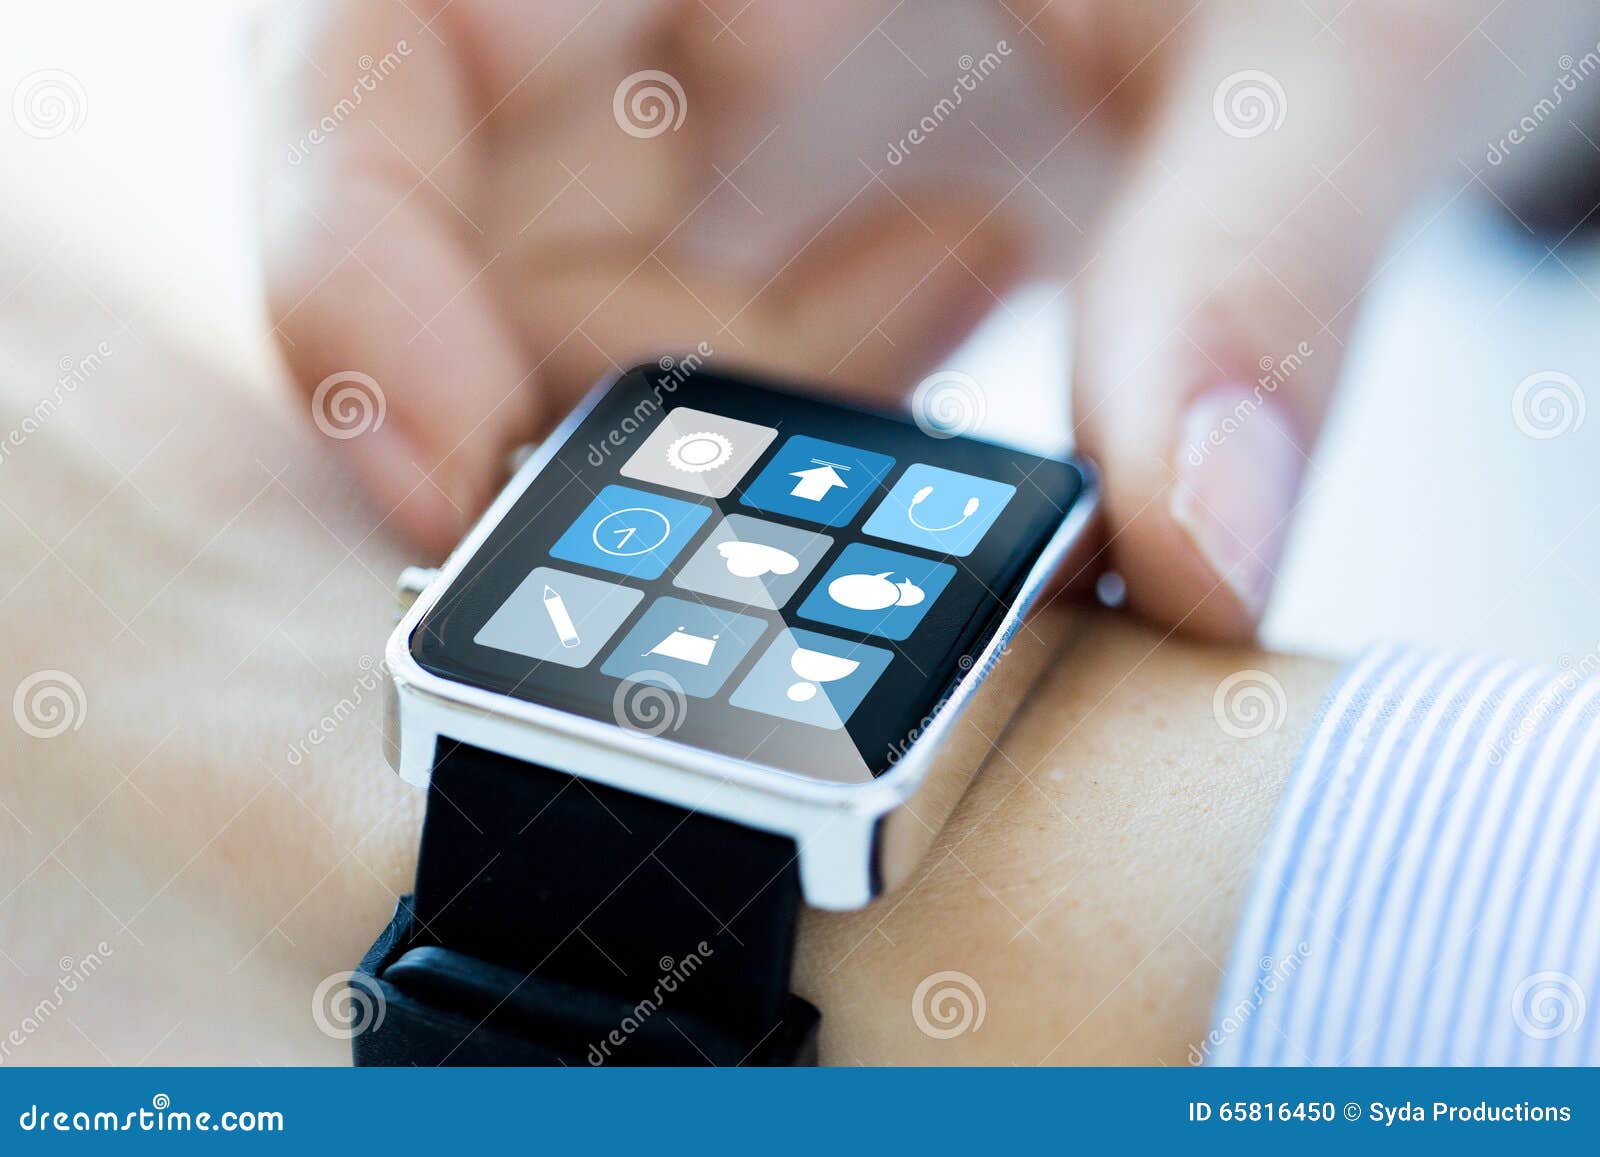 Smart watch how to set time to get